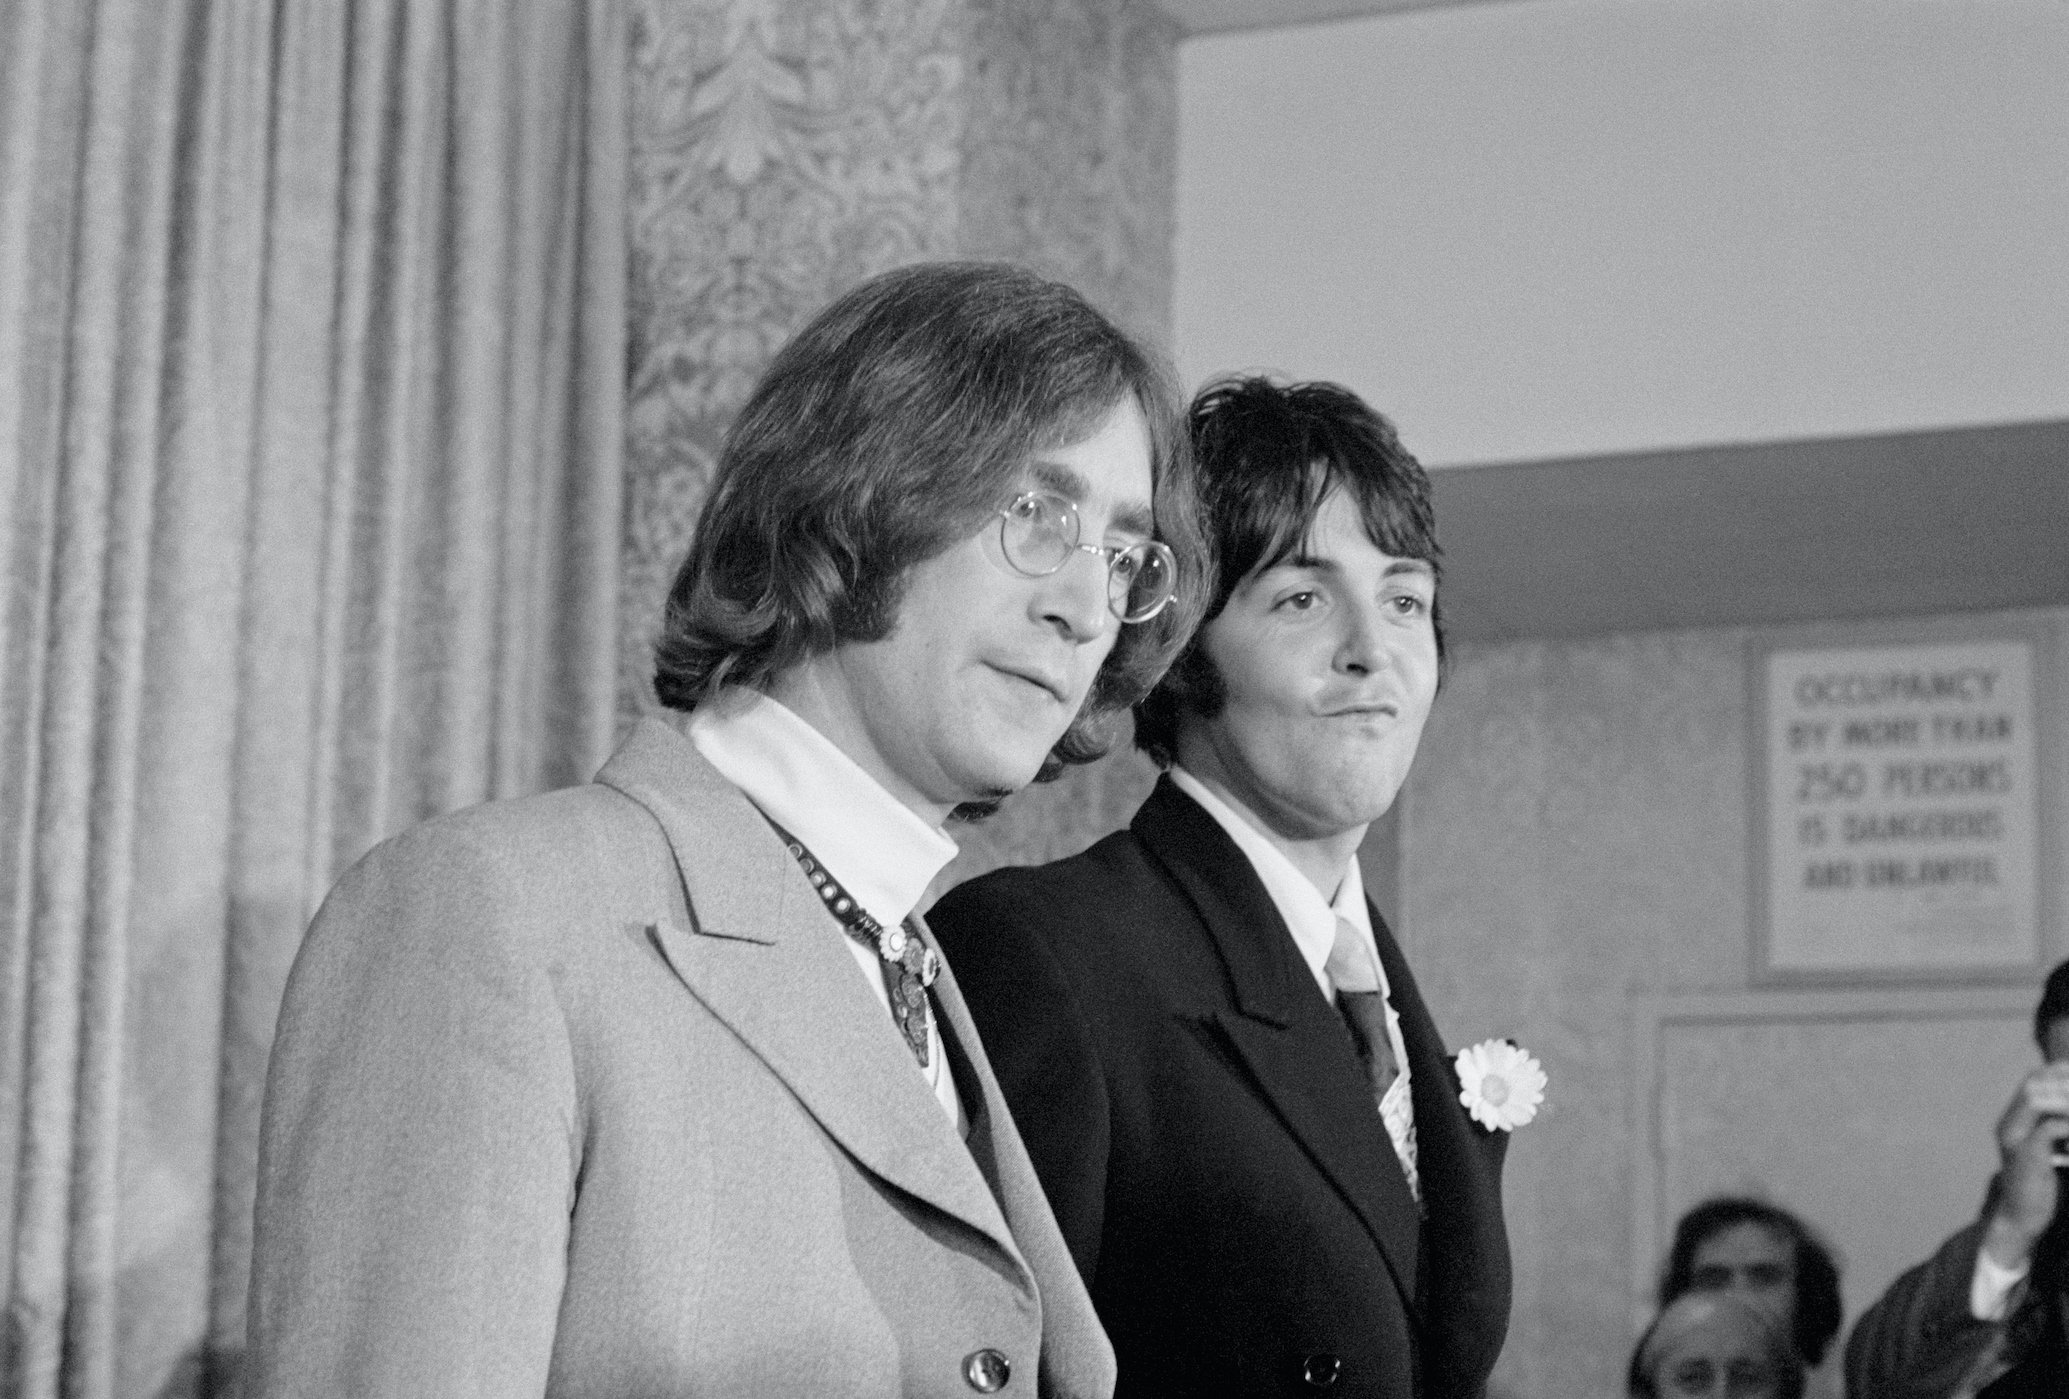 John Lennon and Paul McCartney appear in front of press to announce the formation of Apple Corps.